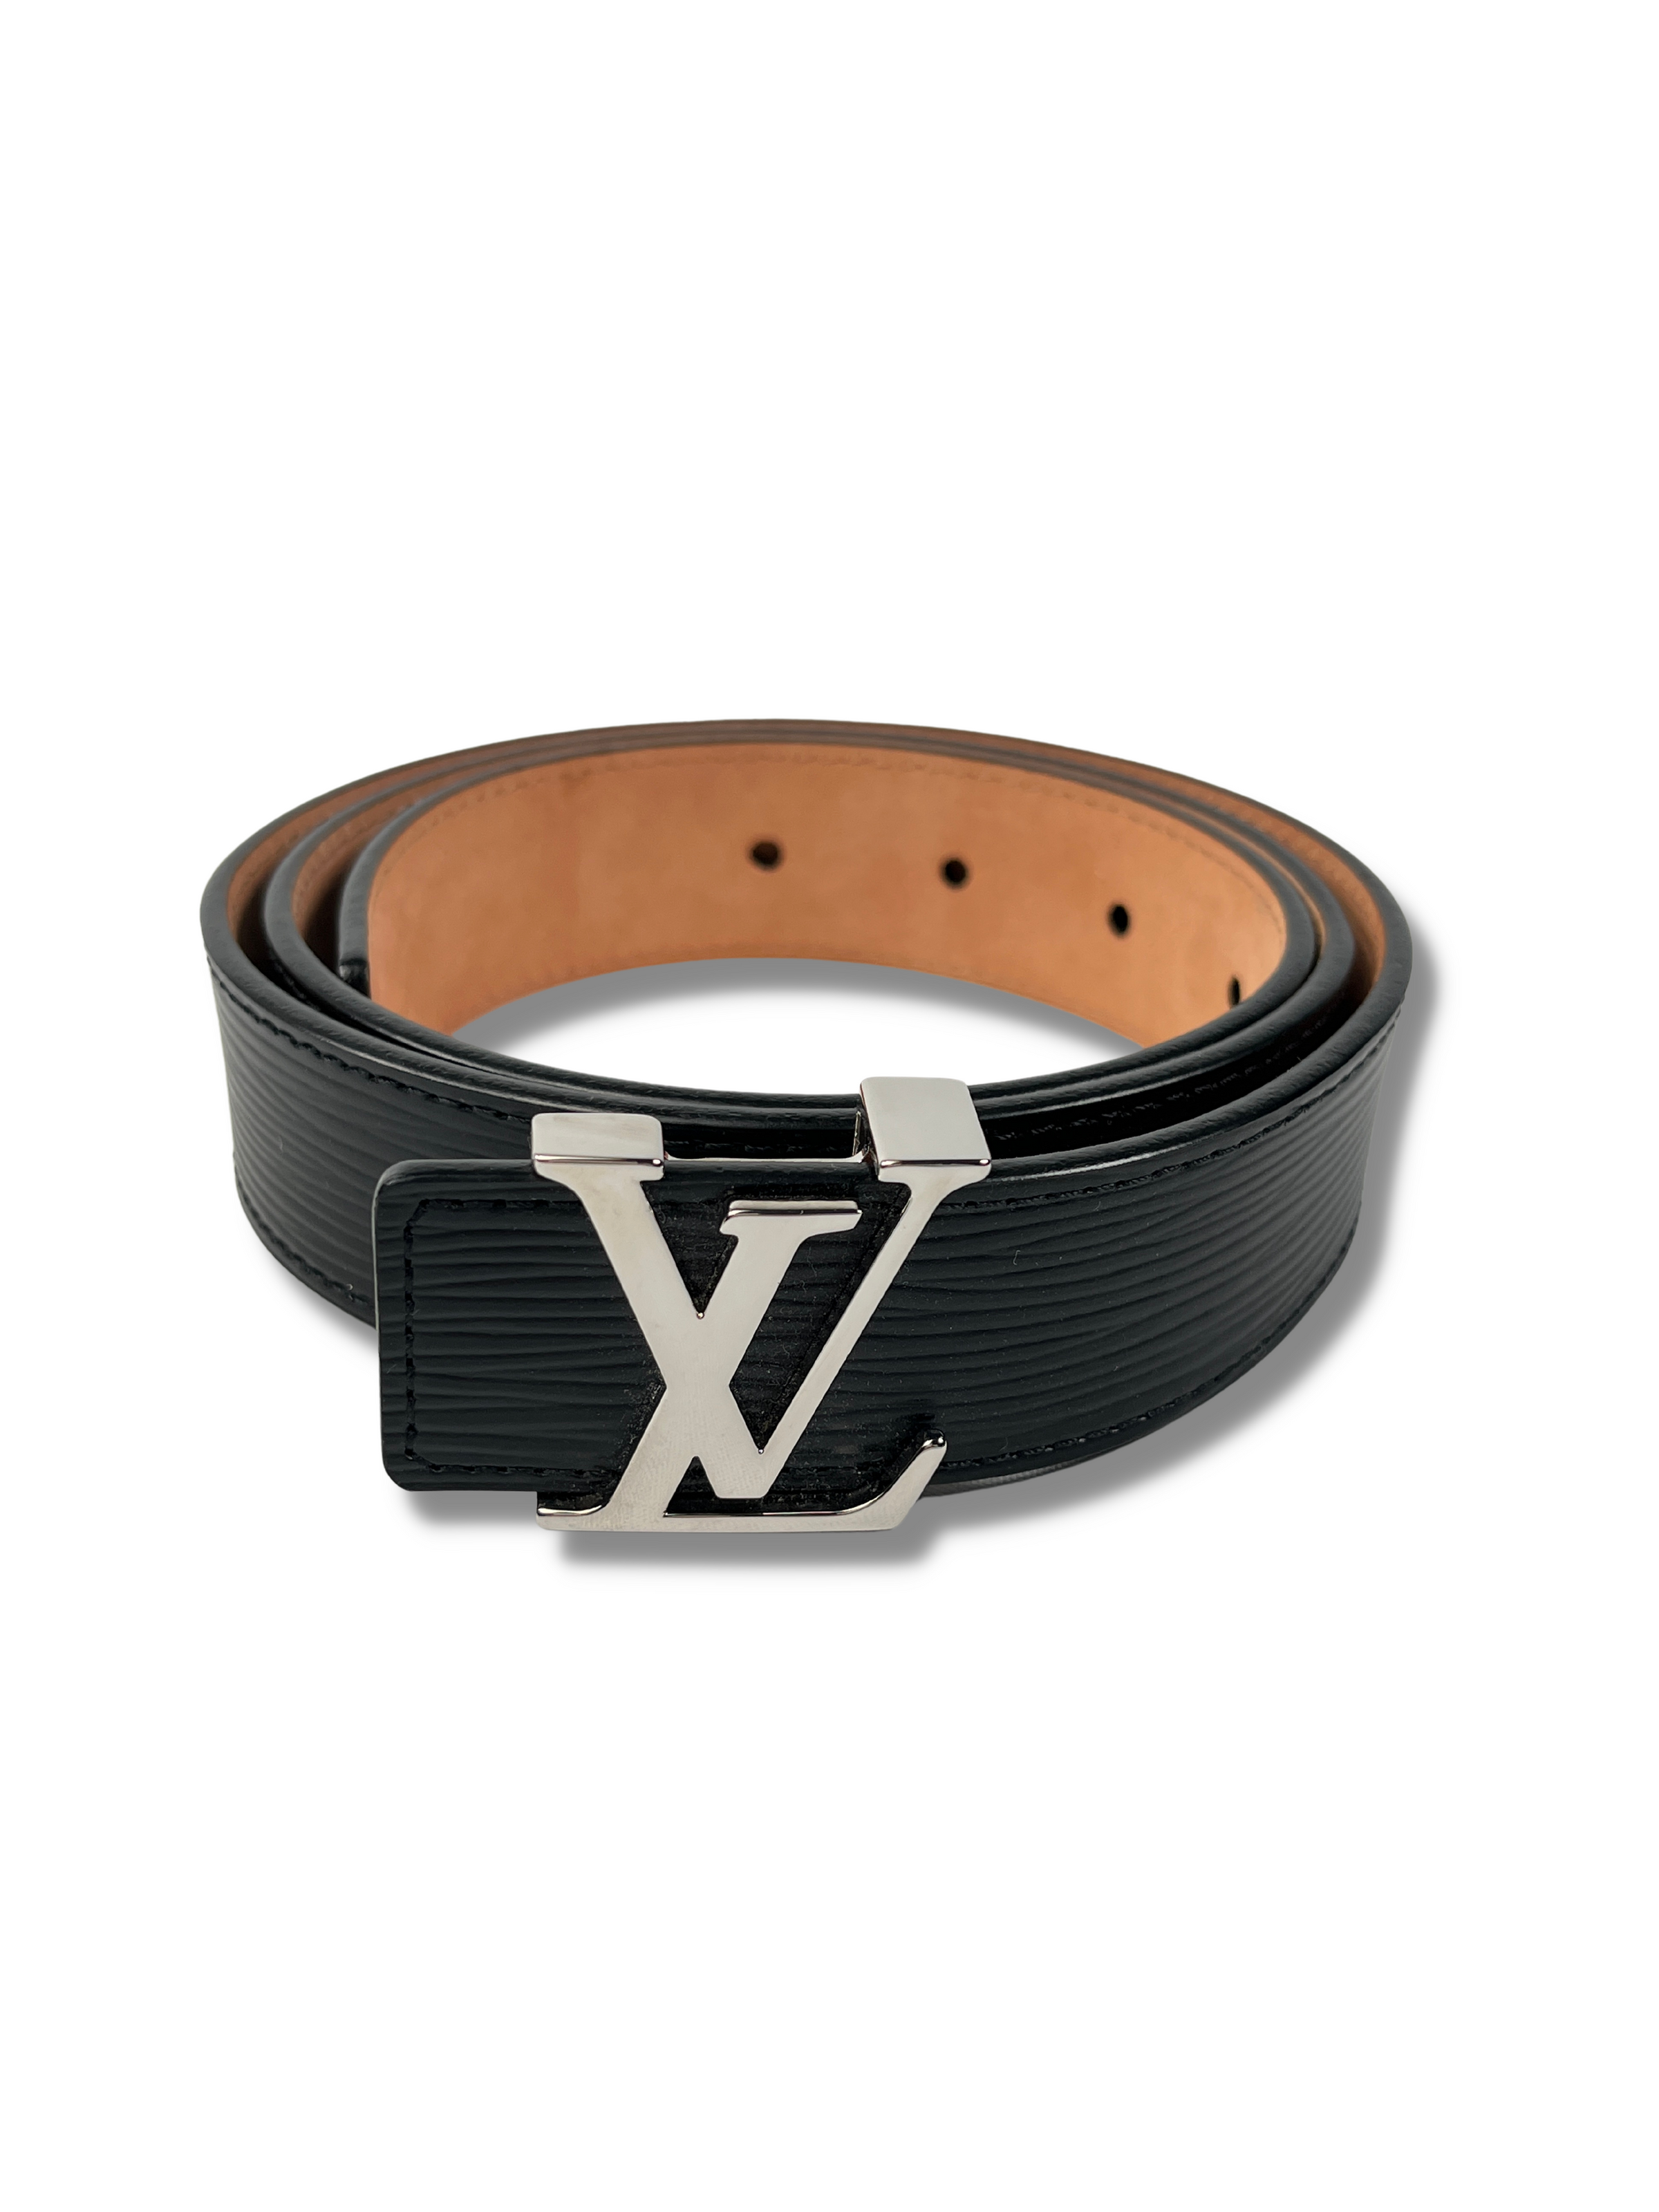 Initiales leather belt Louis Vuitton Black size 85 cm in Leather